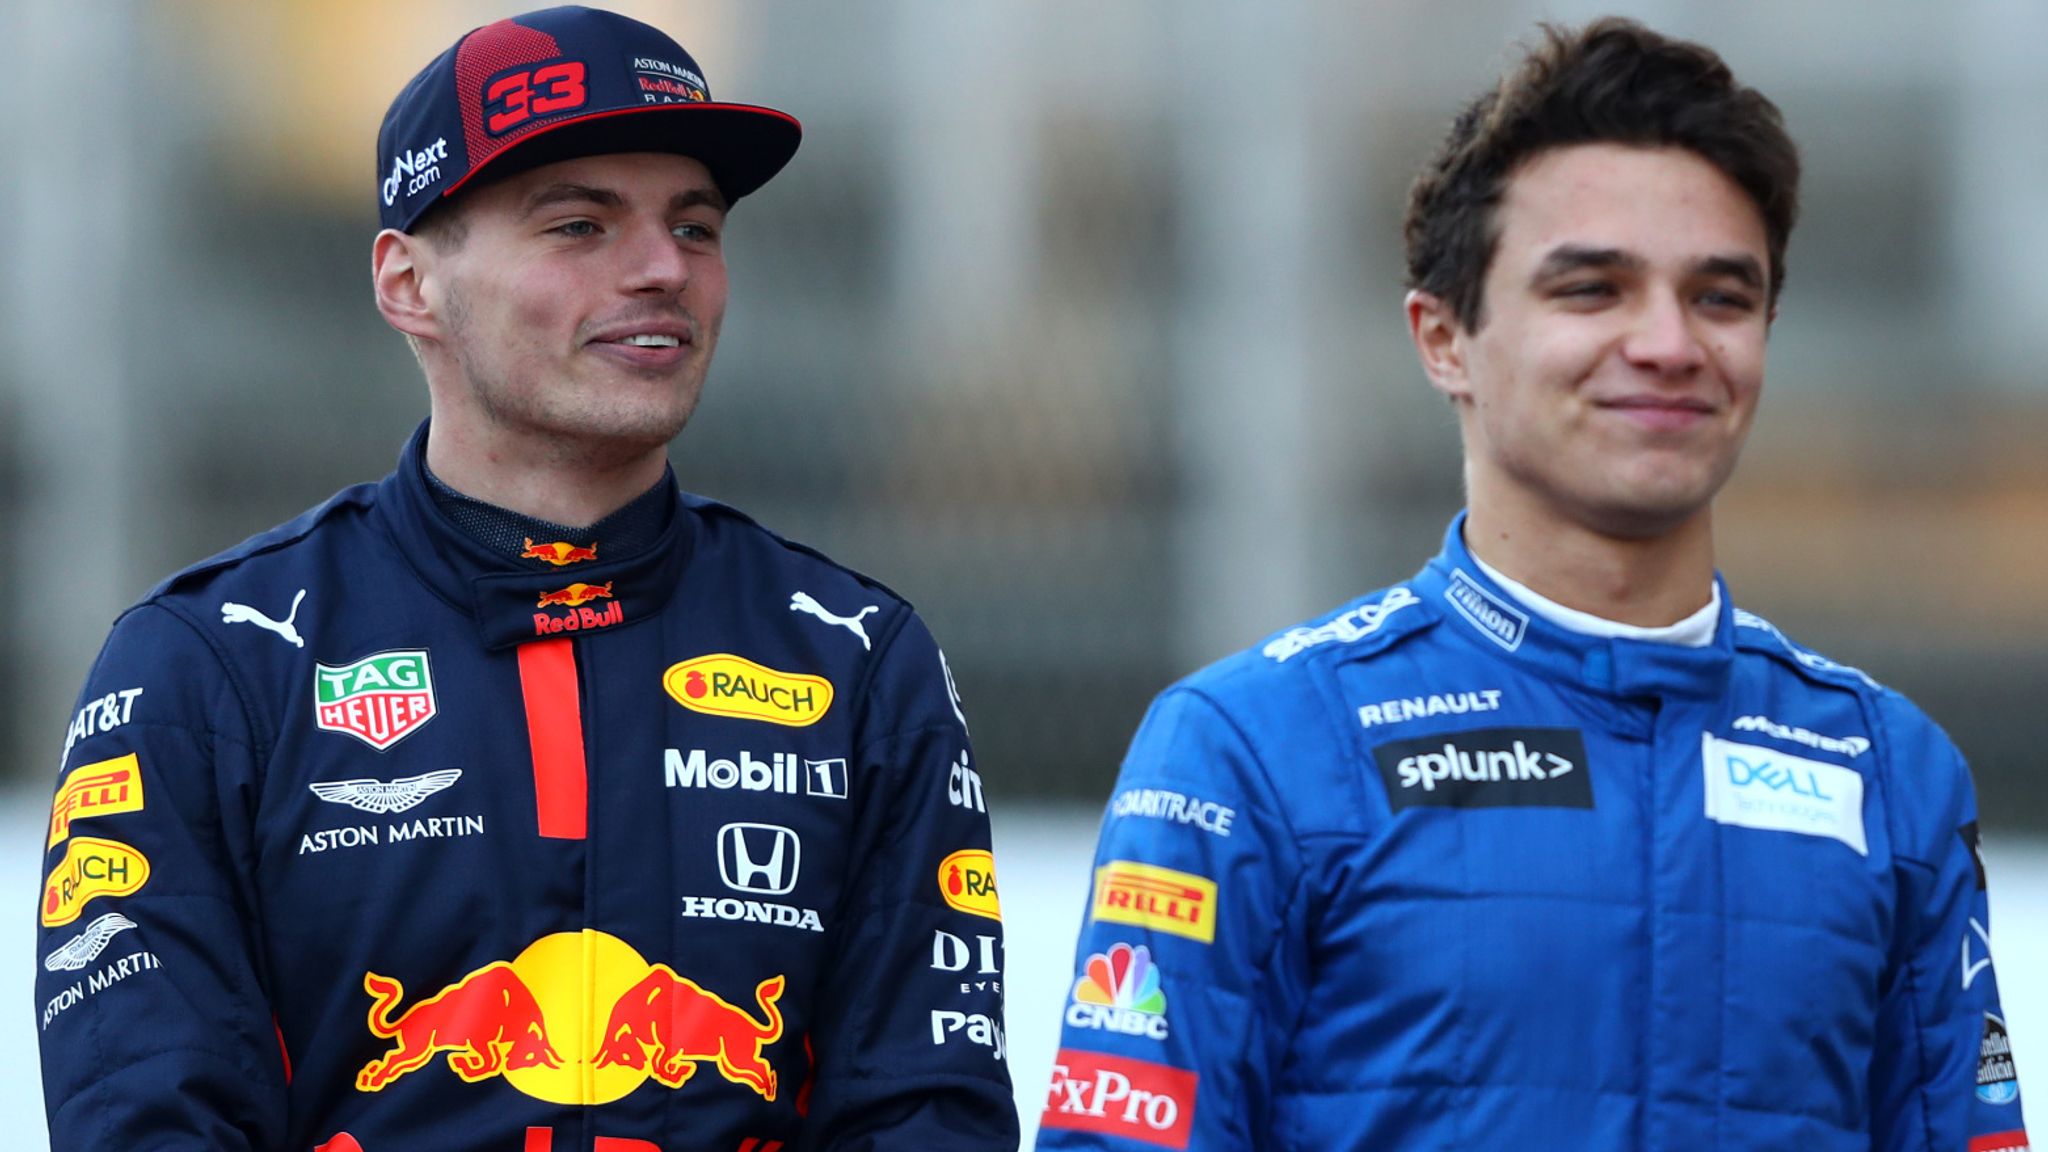 Max Verstappen and Lando Norris race online to make up for lack of F1 F1 News